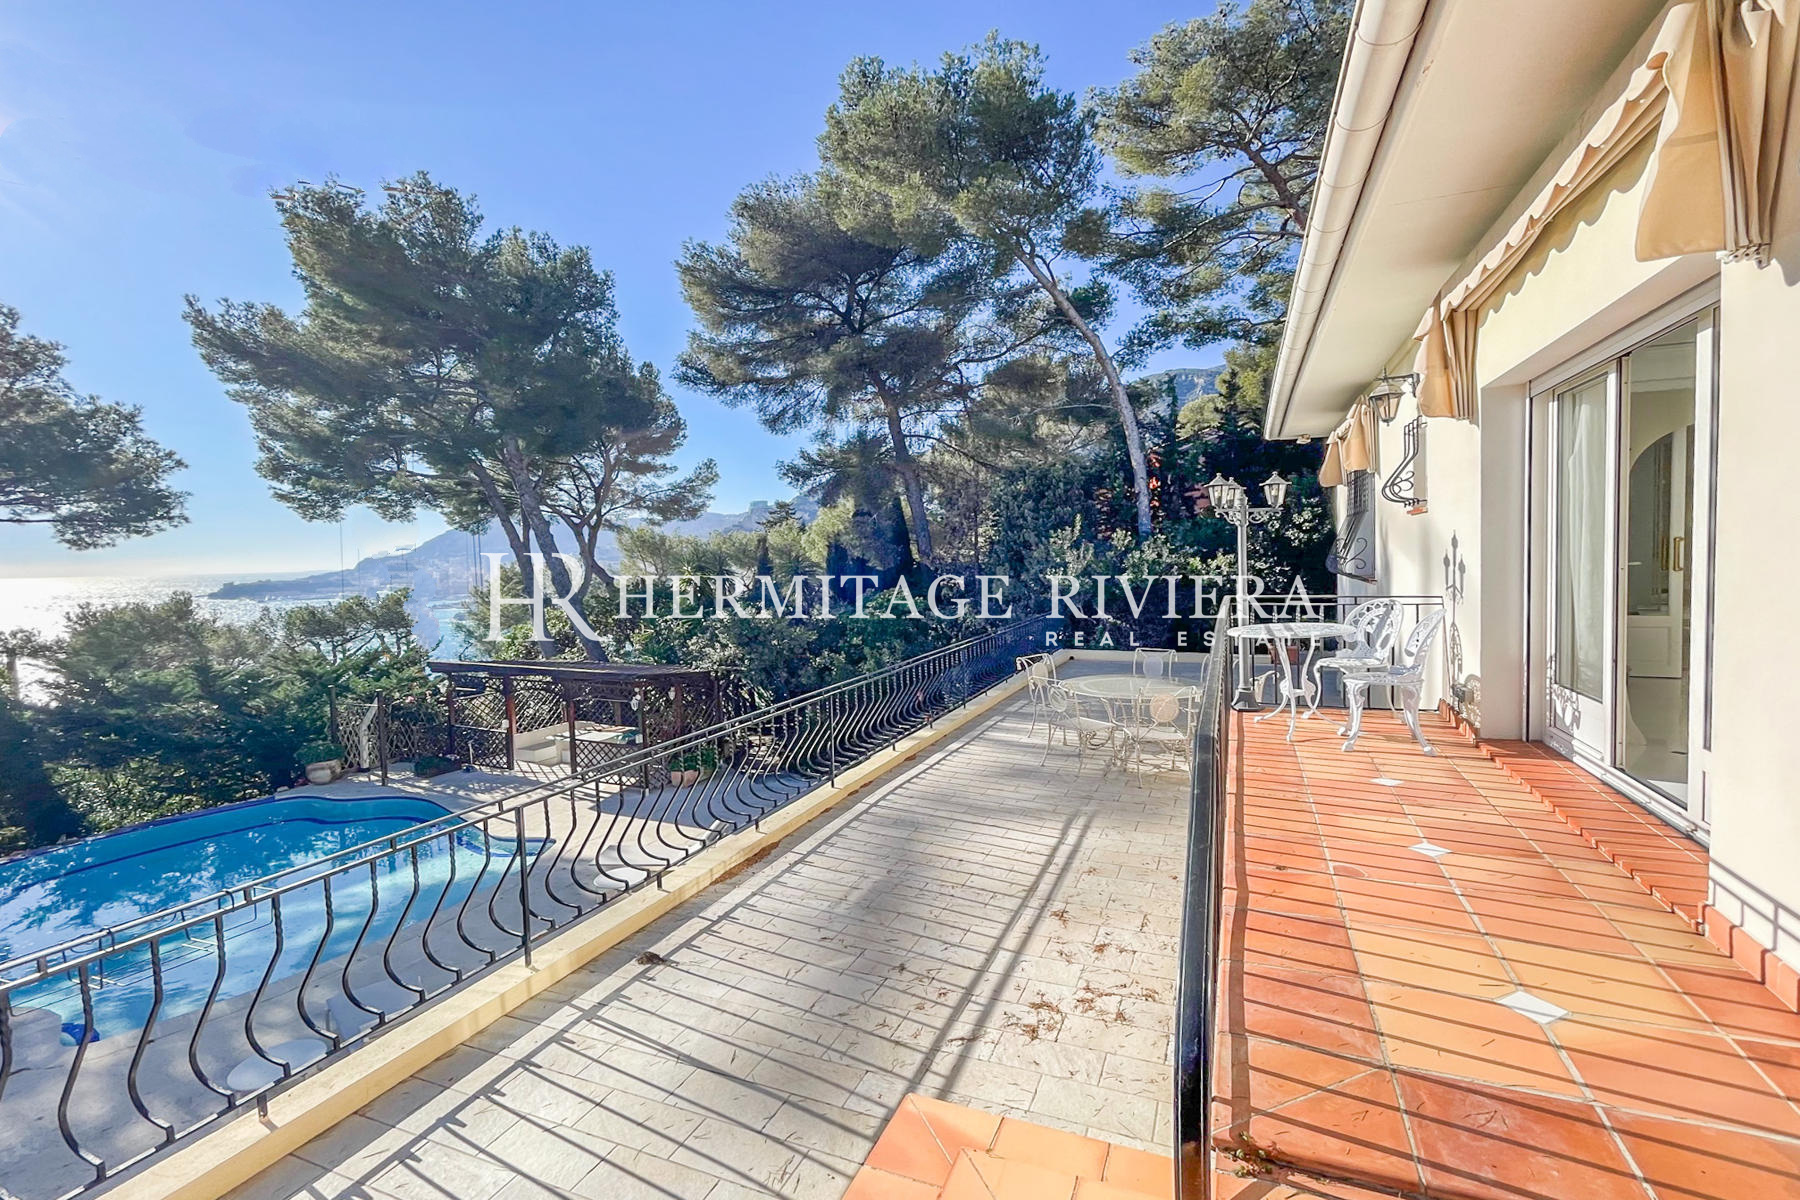 Property with views Monaco in sought after location (image 6)